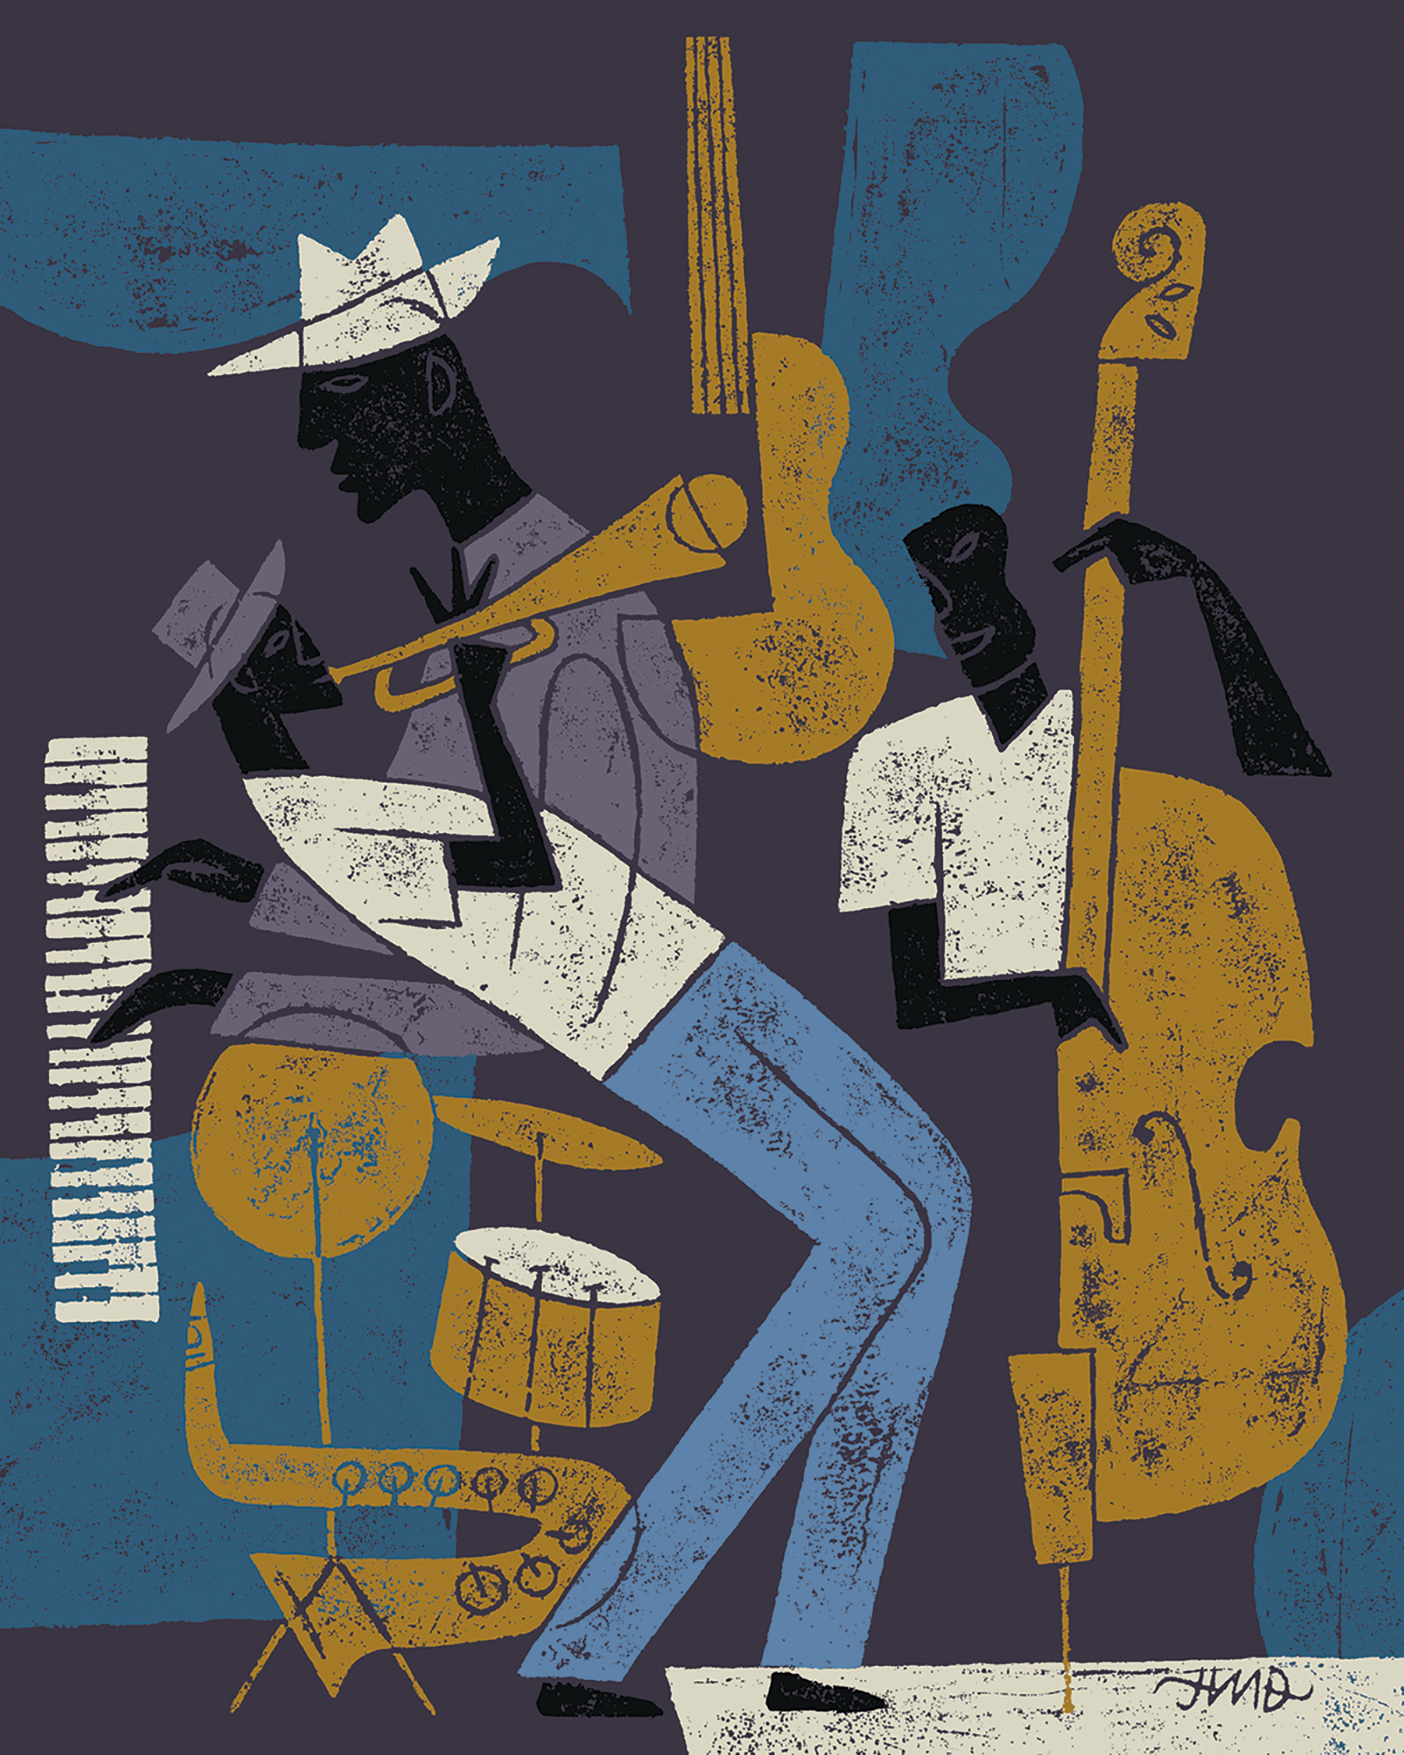 Illustration of a jazz band playing